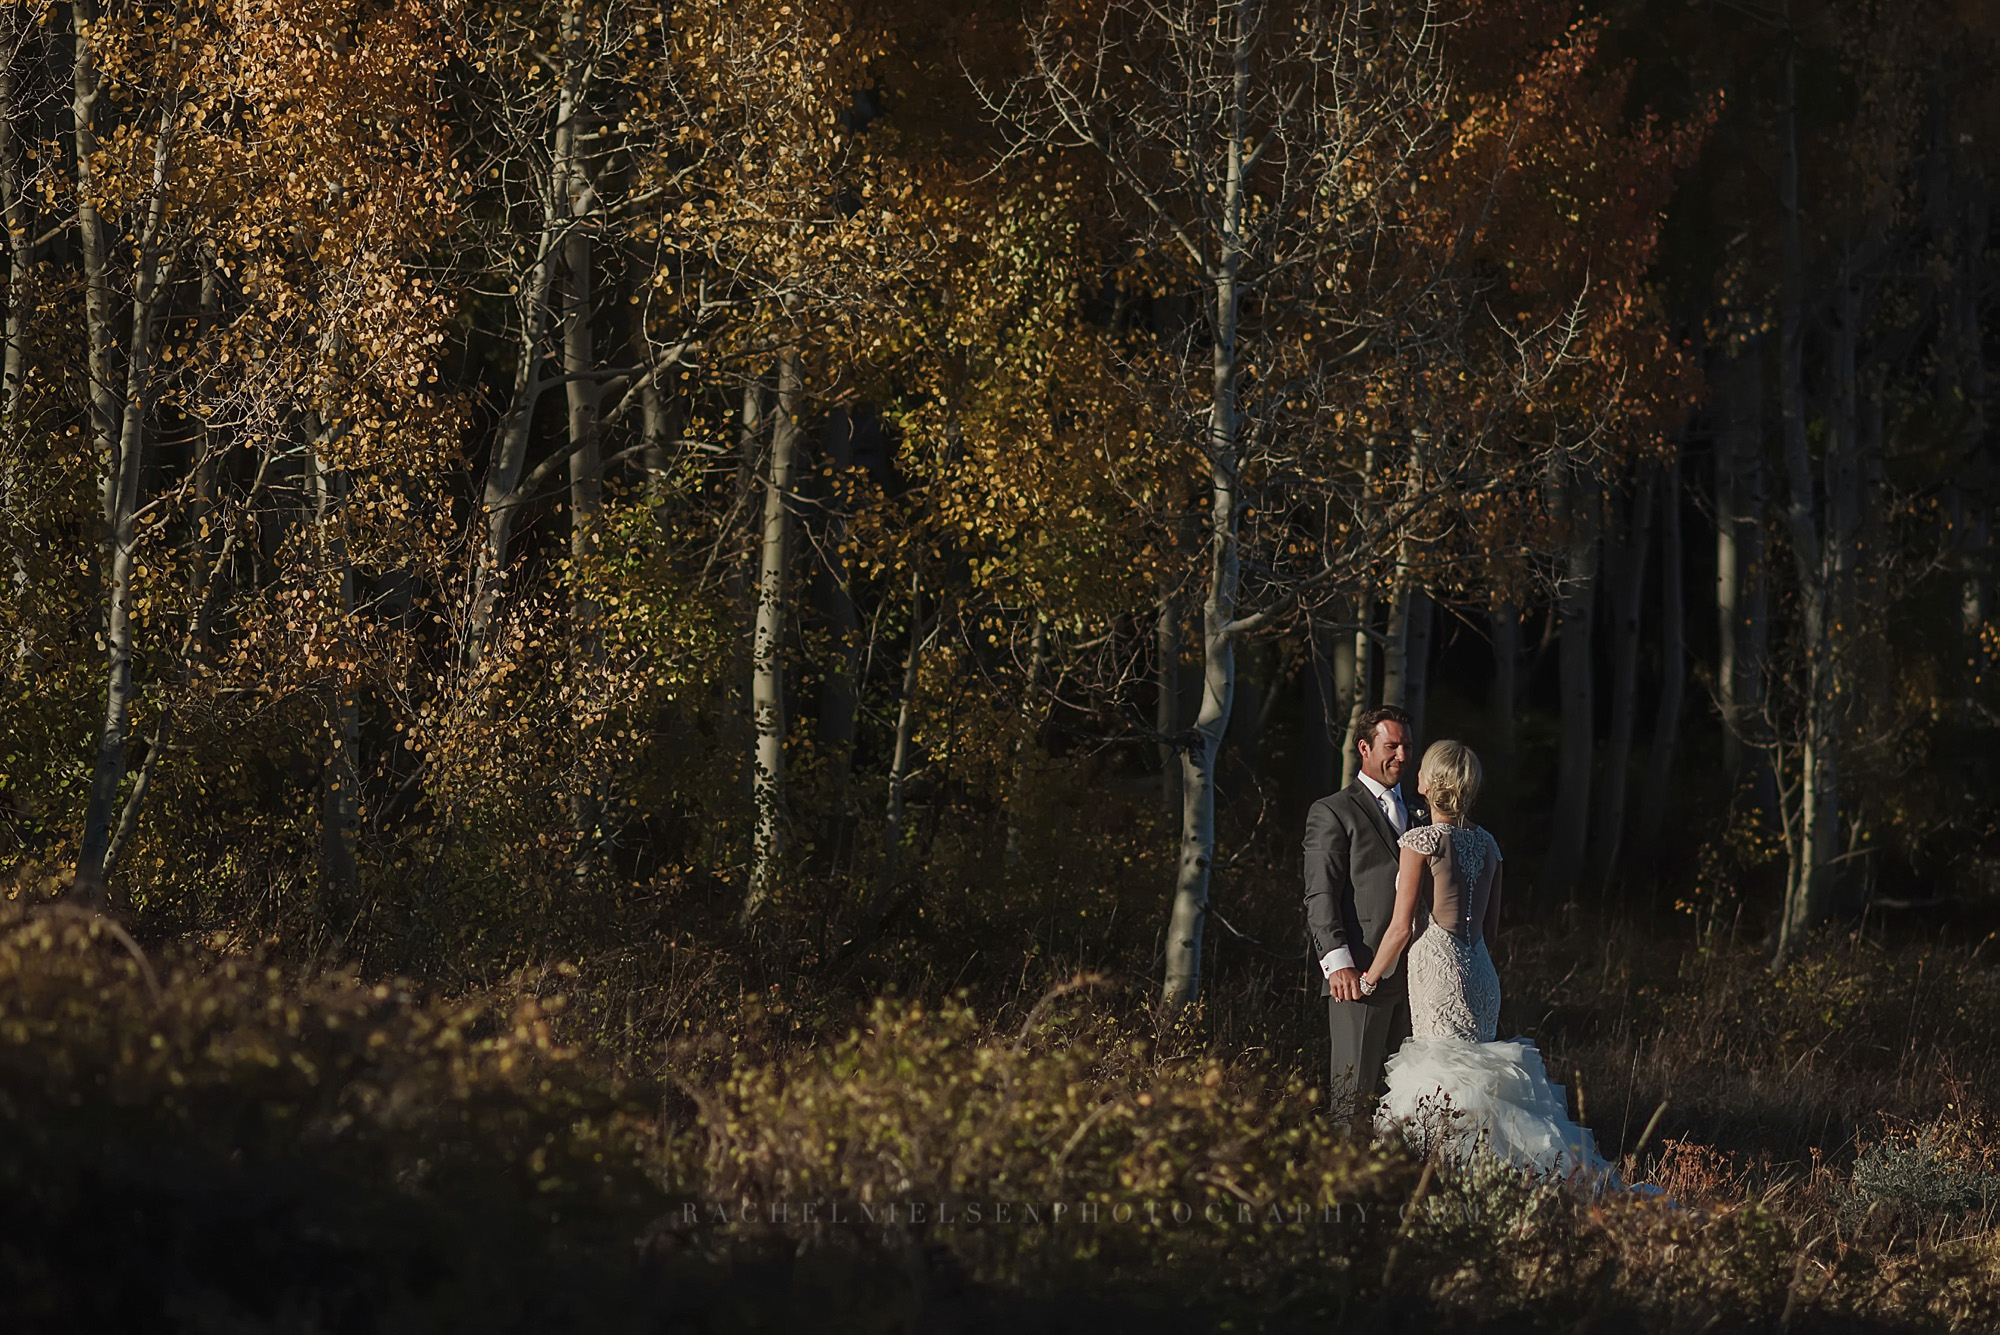 Part 2 – Montage Deer Valley Elopement – Colby and Britt